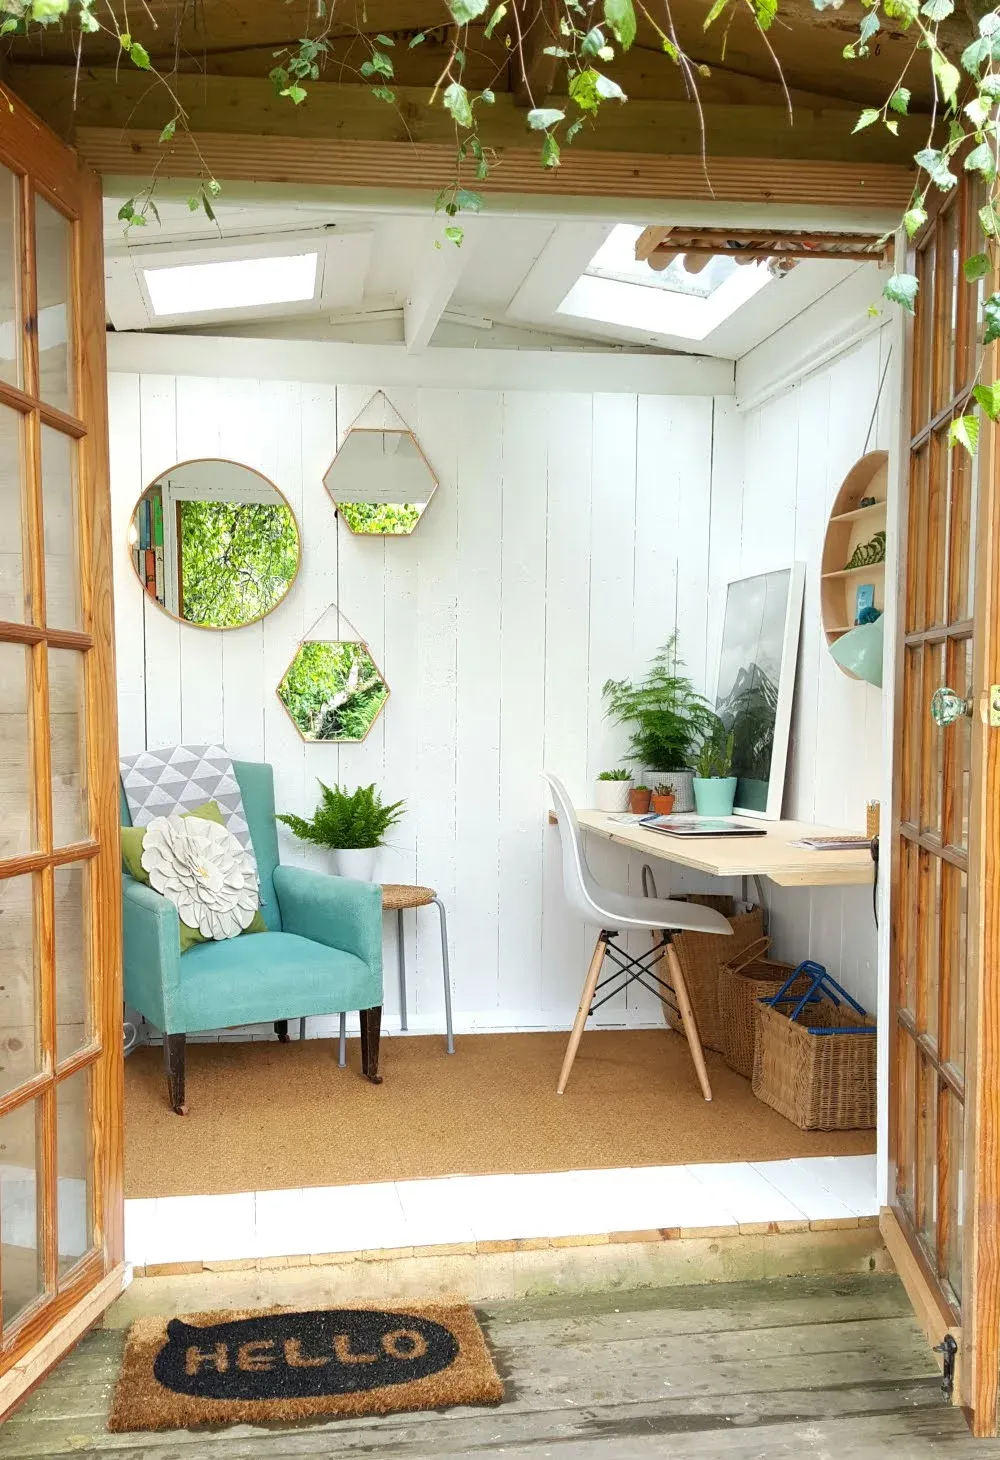 An outdoor office space filled with a teal armchair and a cluster of hexagonal mirrors on the wall